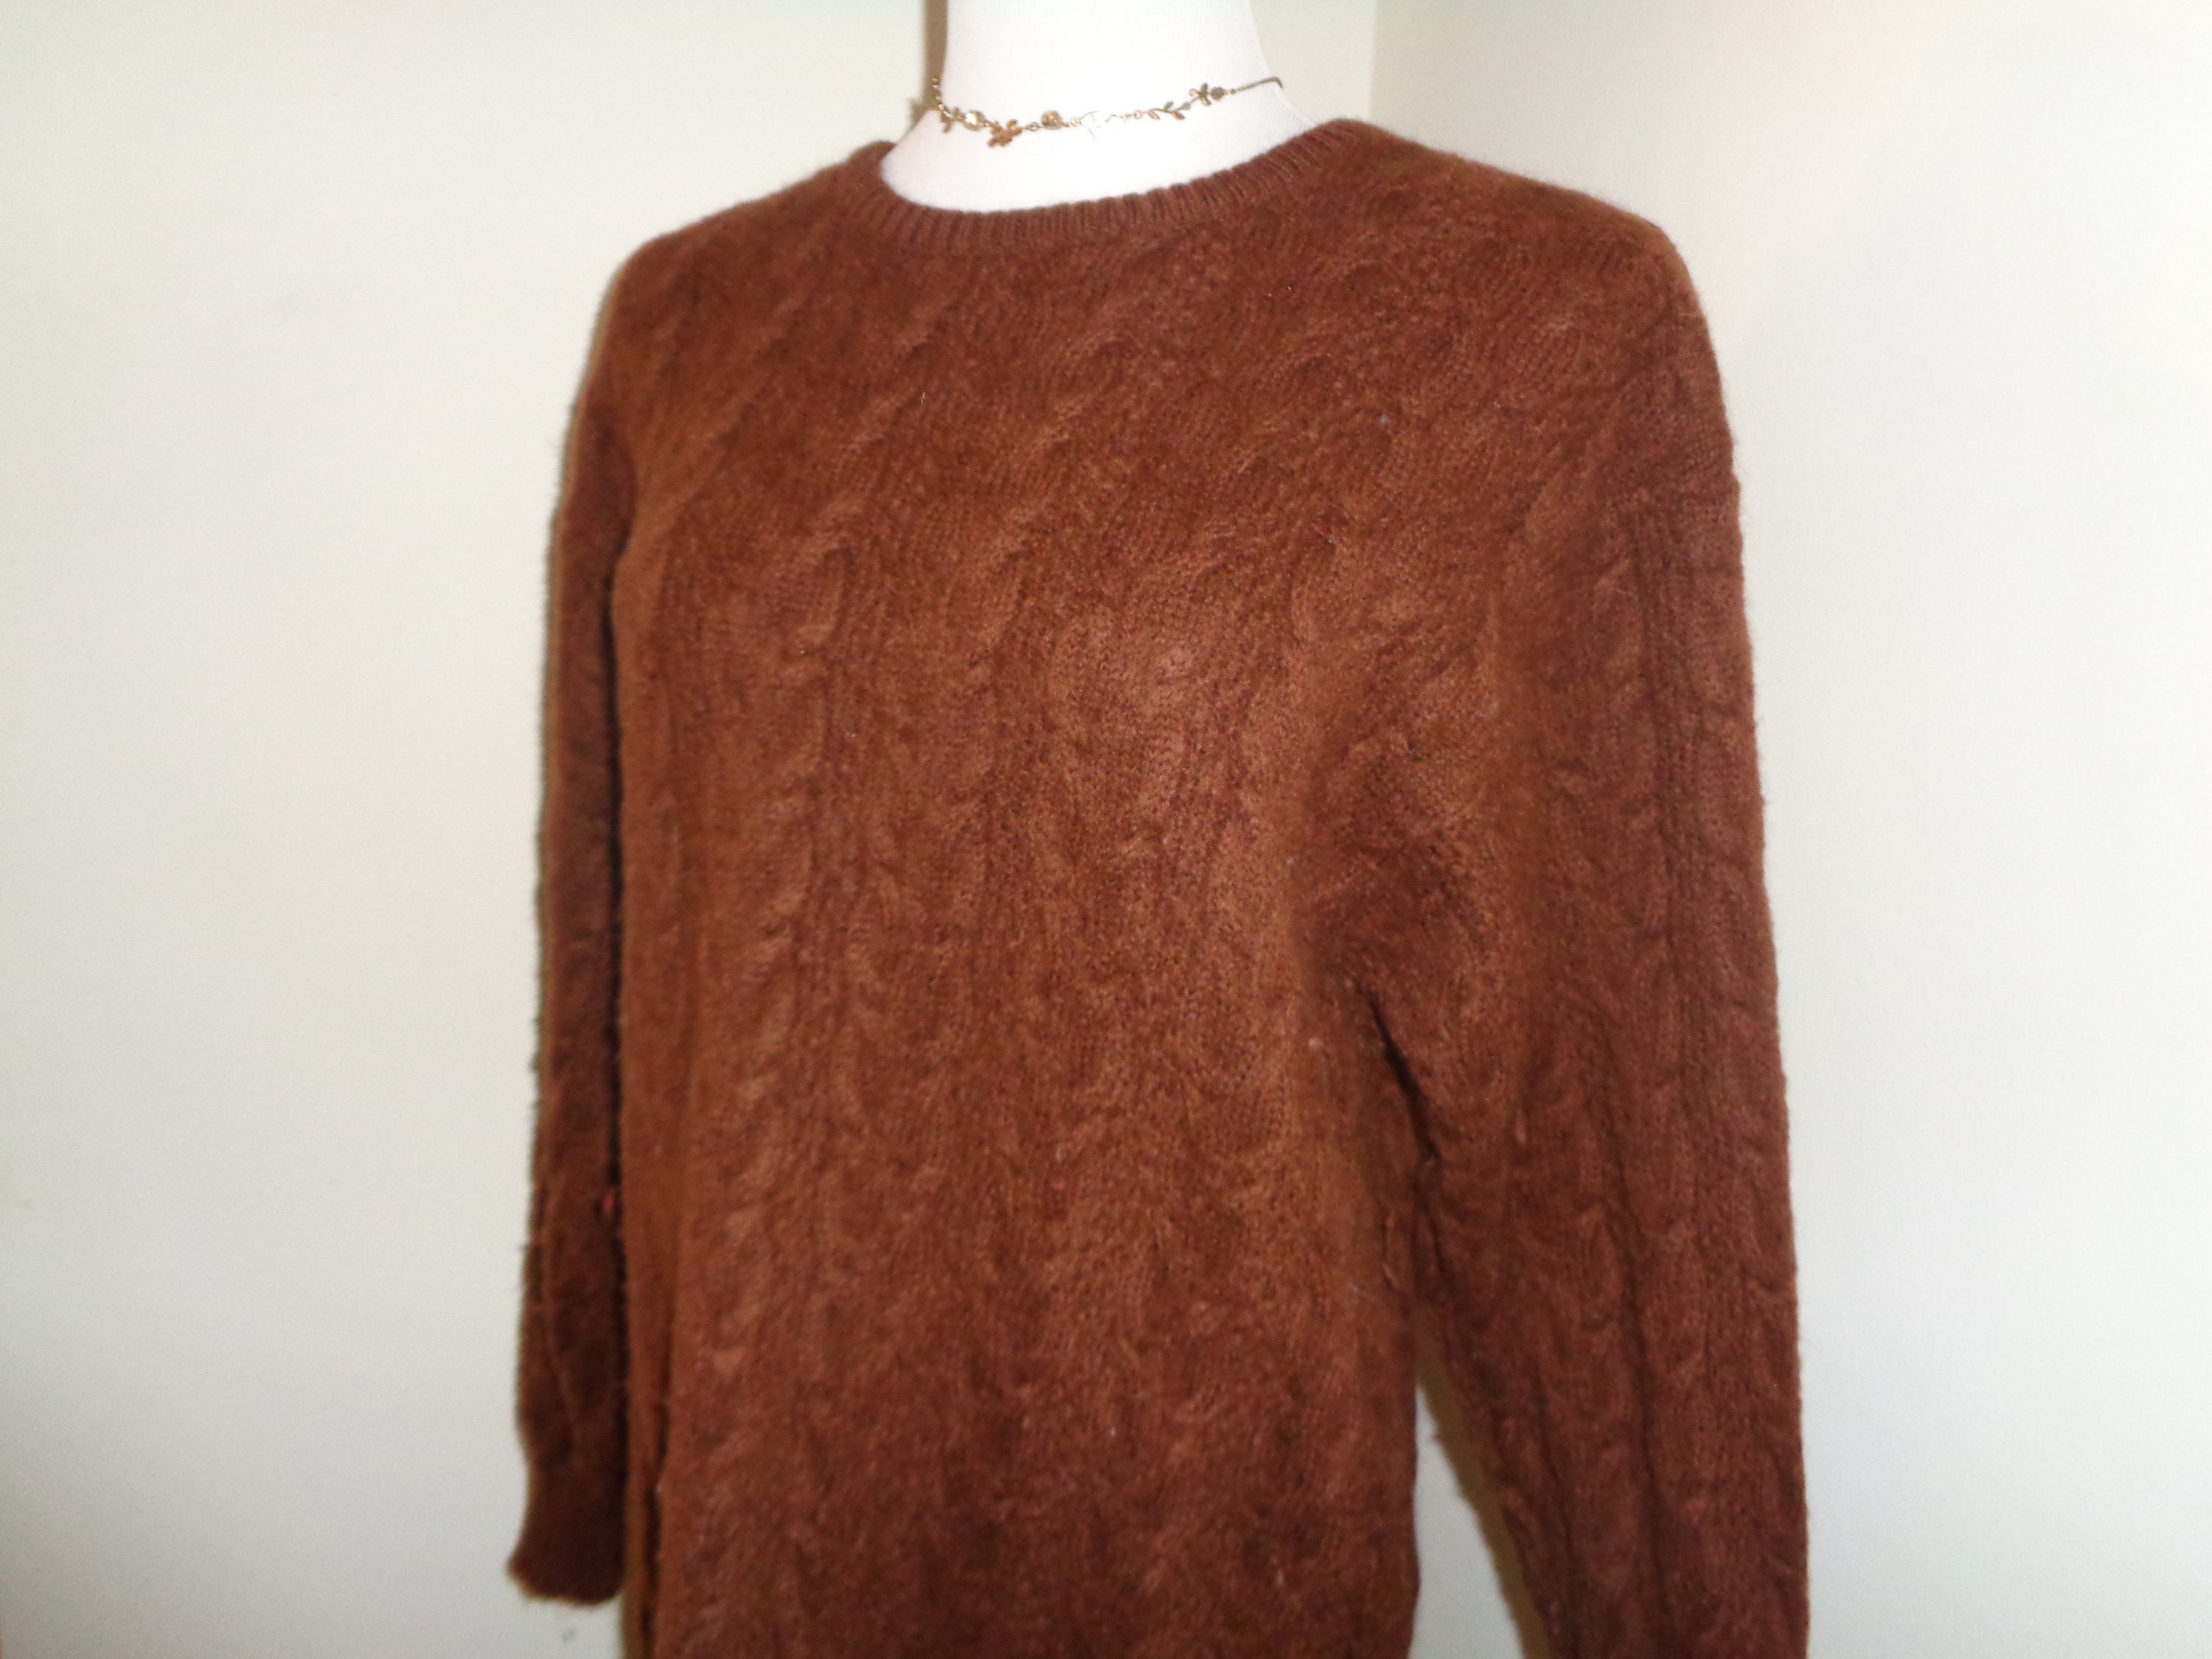 Sheeps Wool Shoulder Pad - Brown Made in the U.S.A.